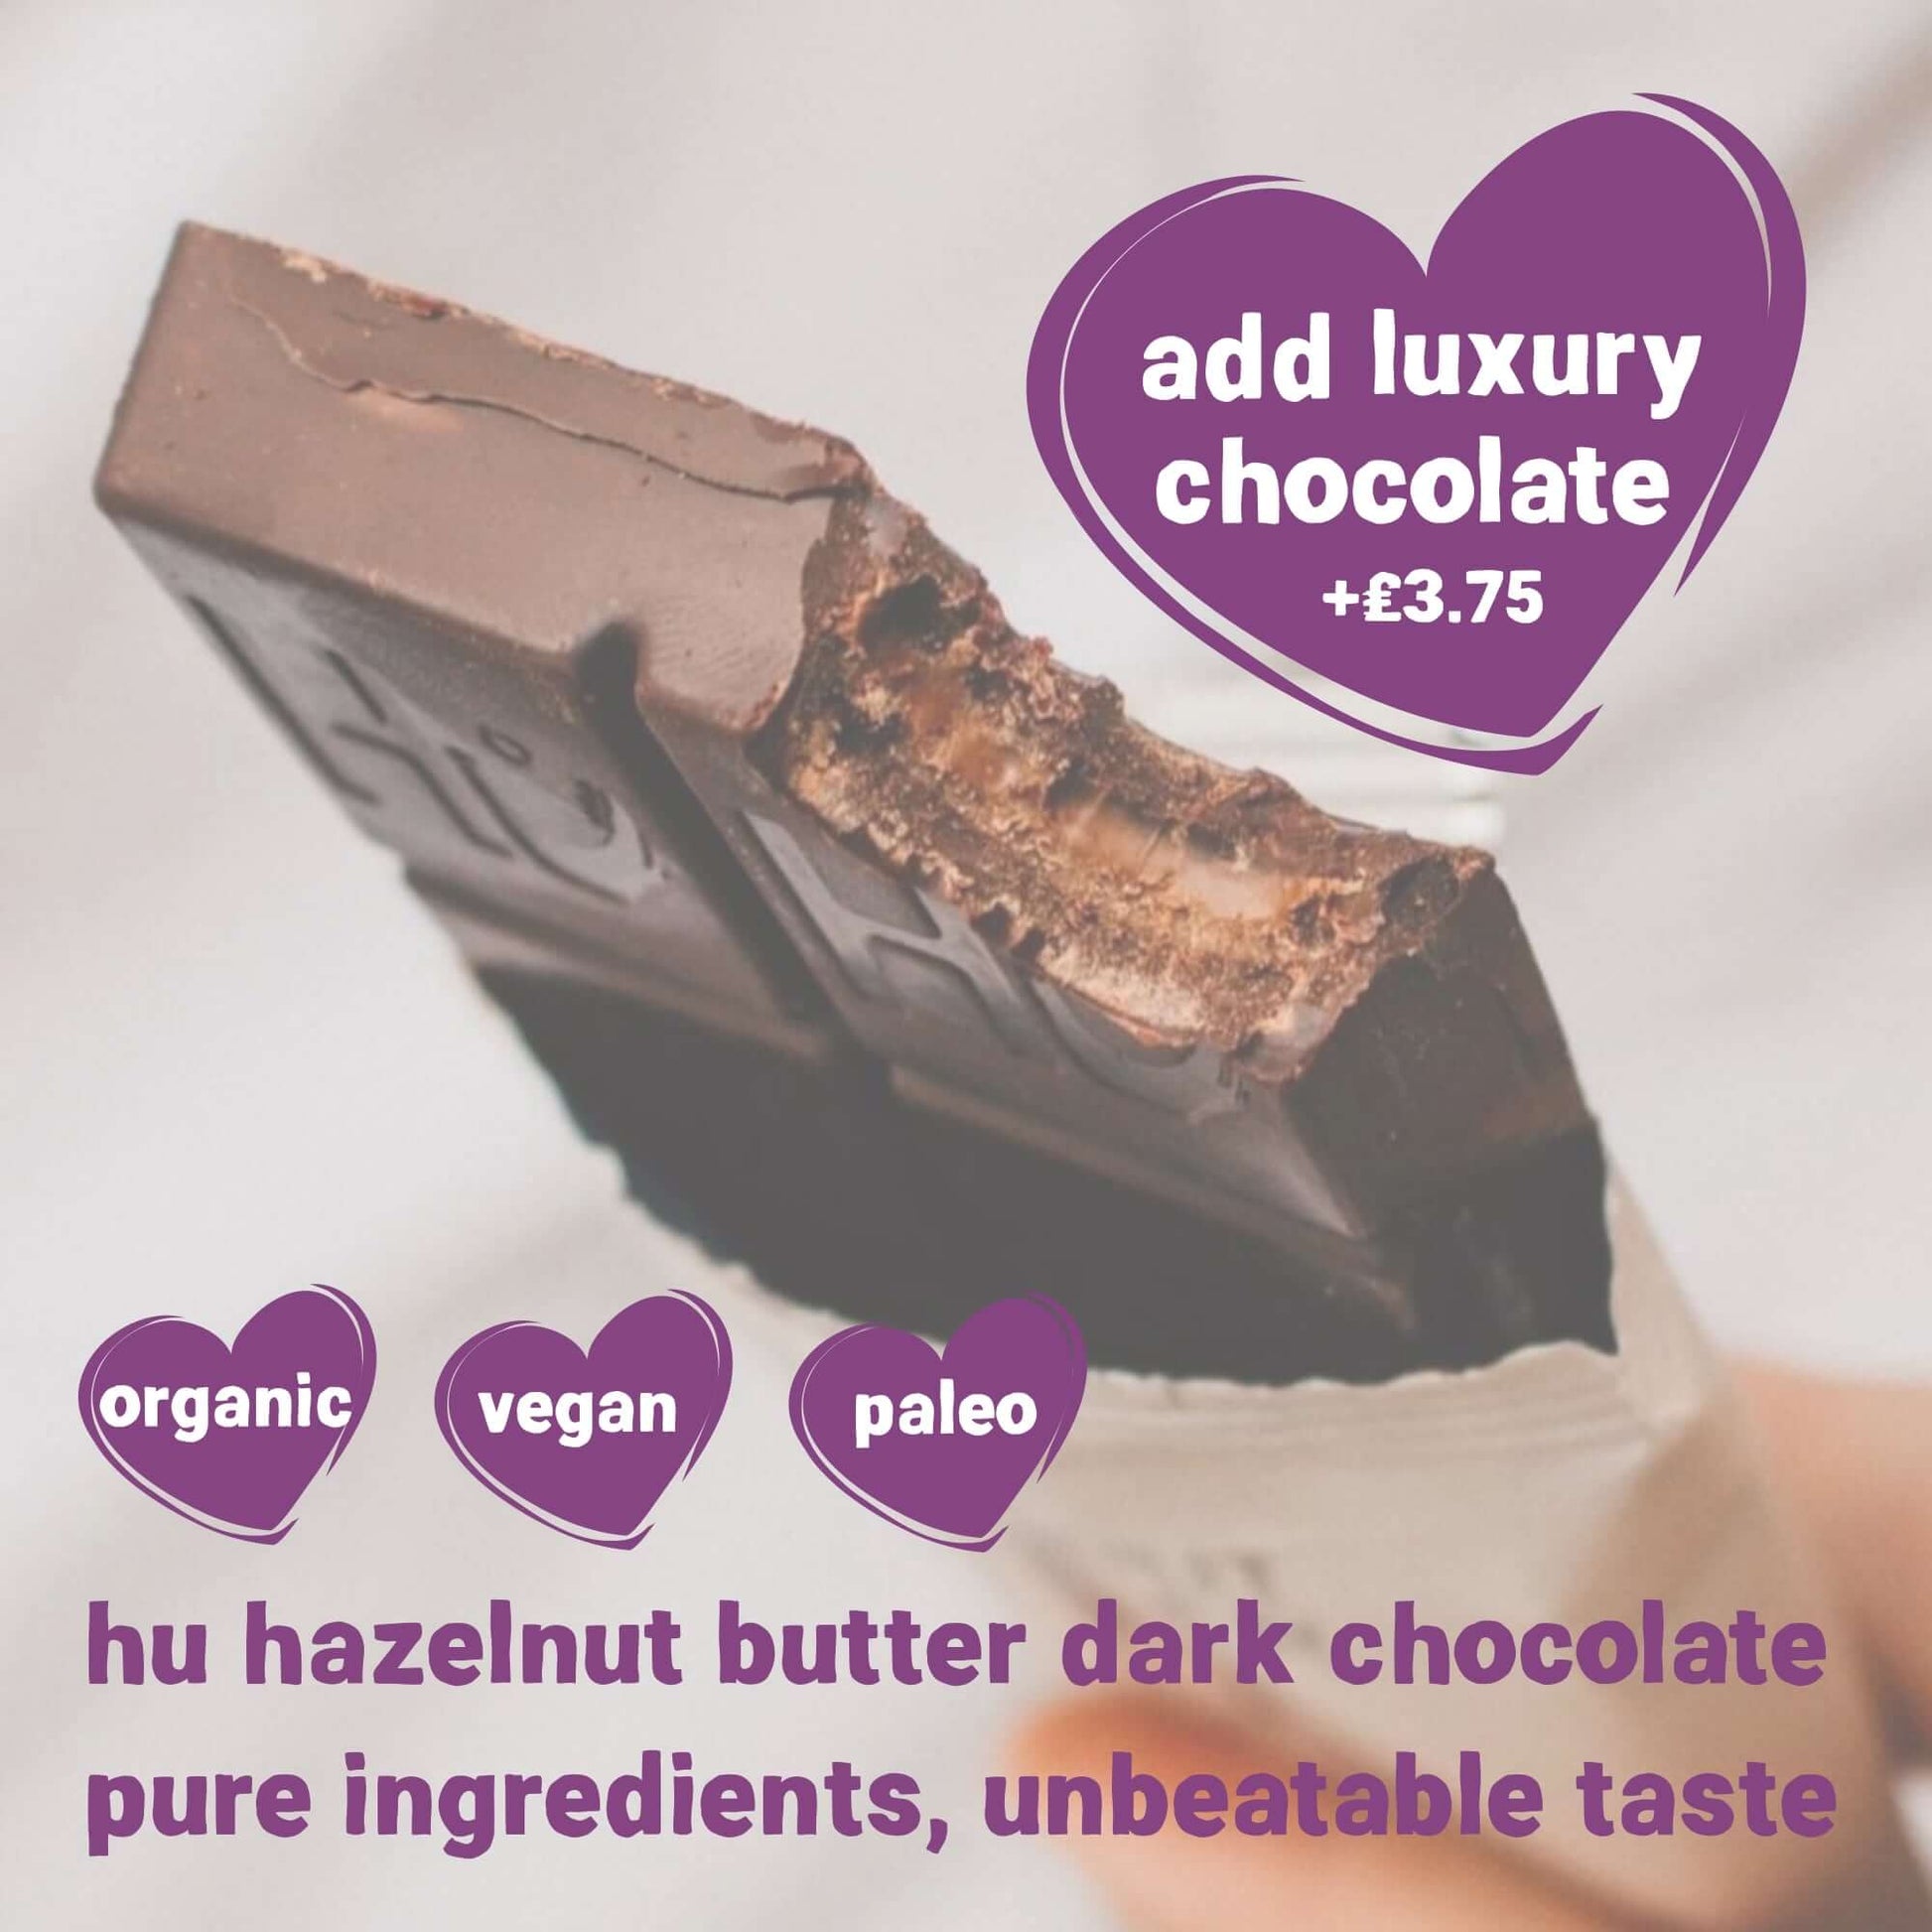 HU Hazelnut Butter chocolate bar, which can be added to the Congratulations gift for an extra chocolatey treat